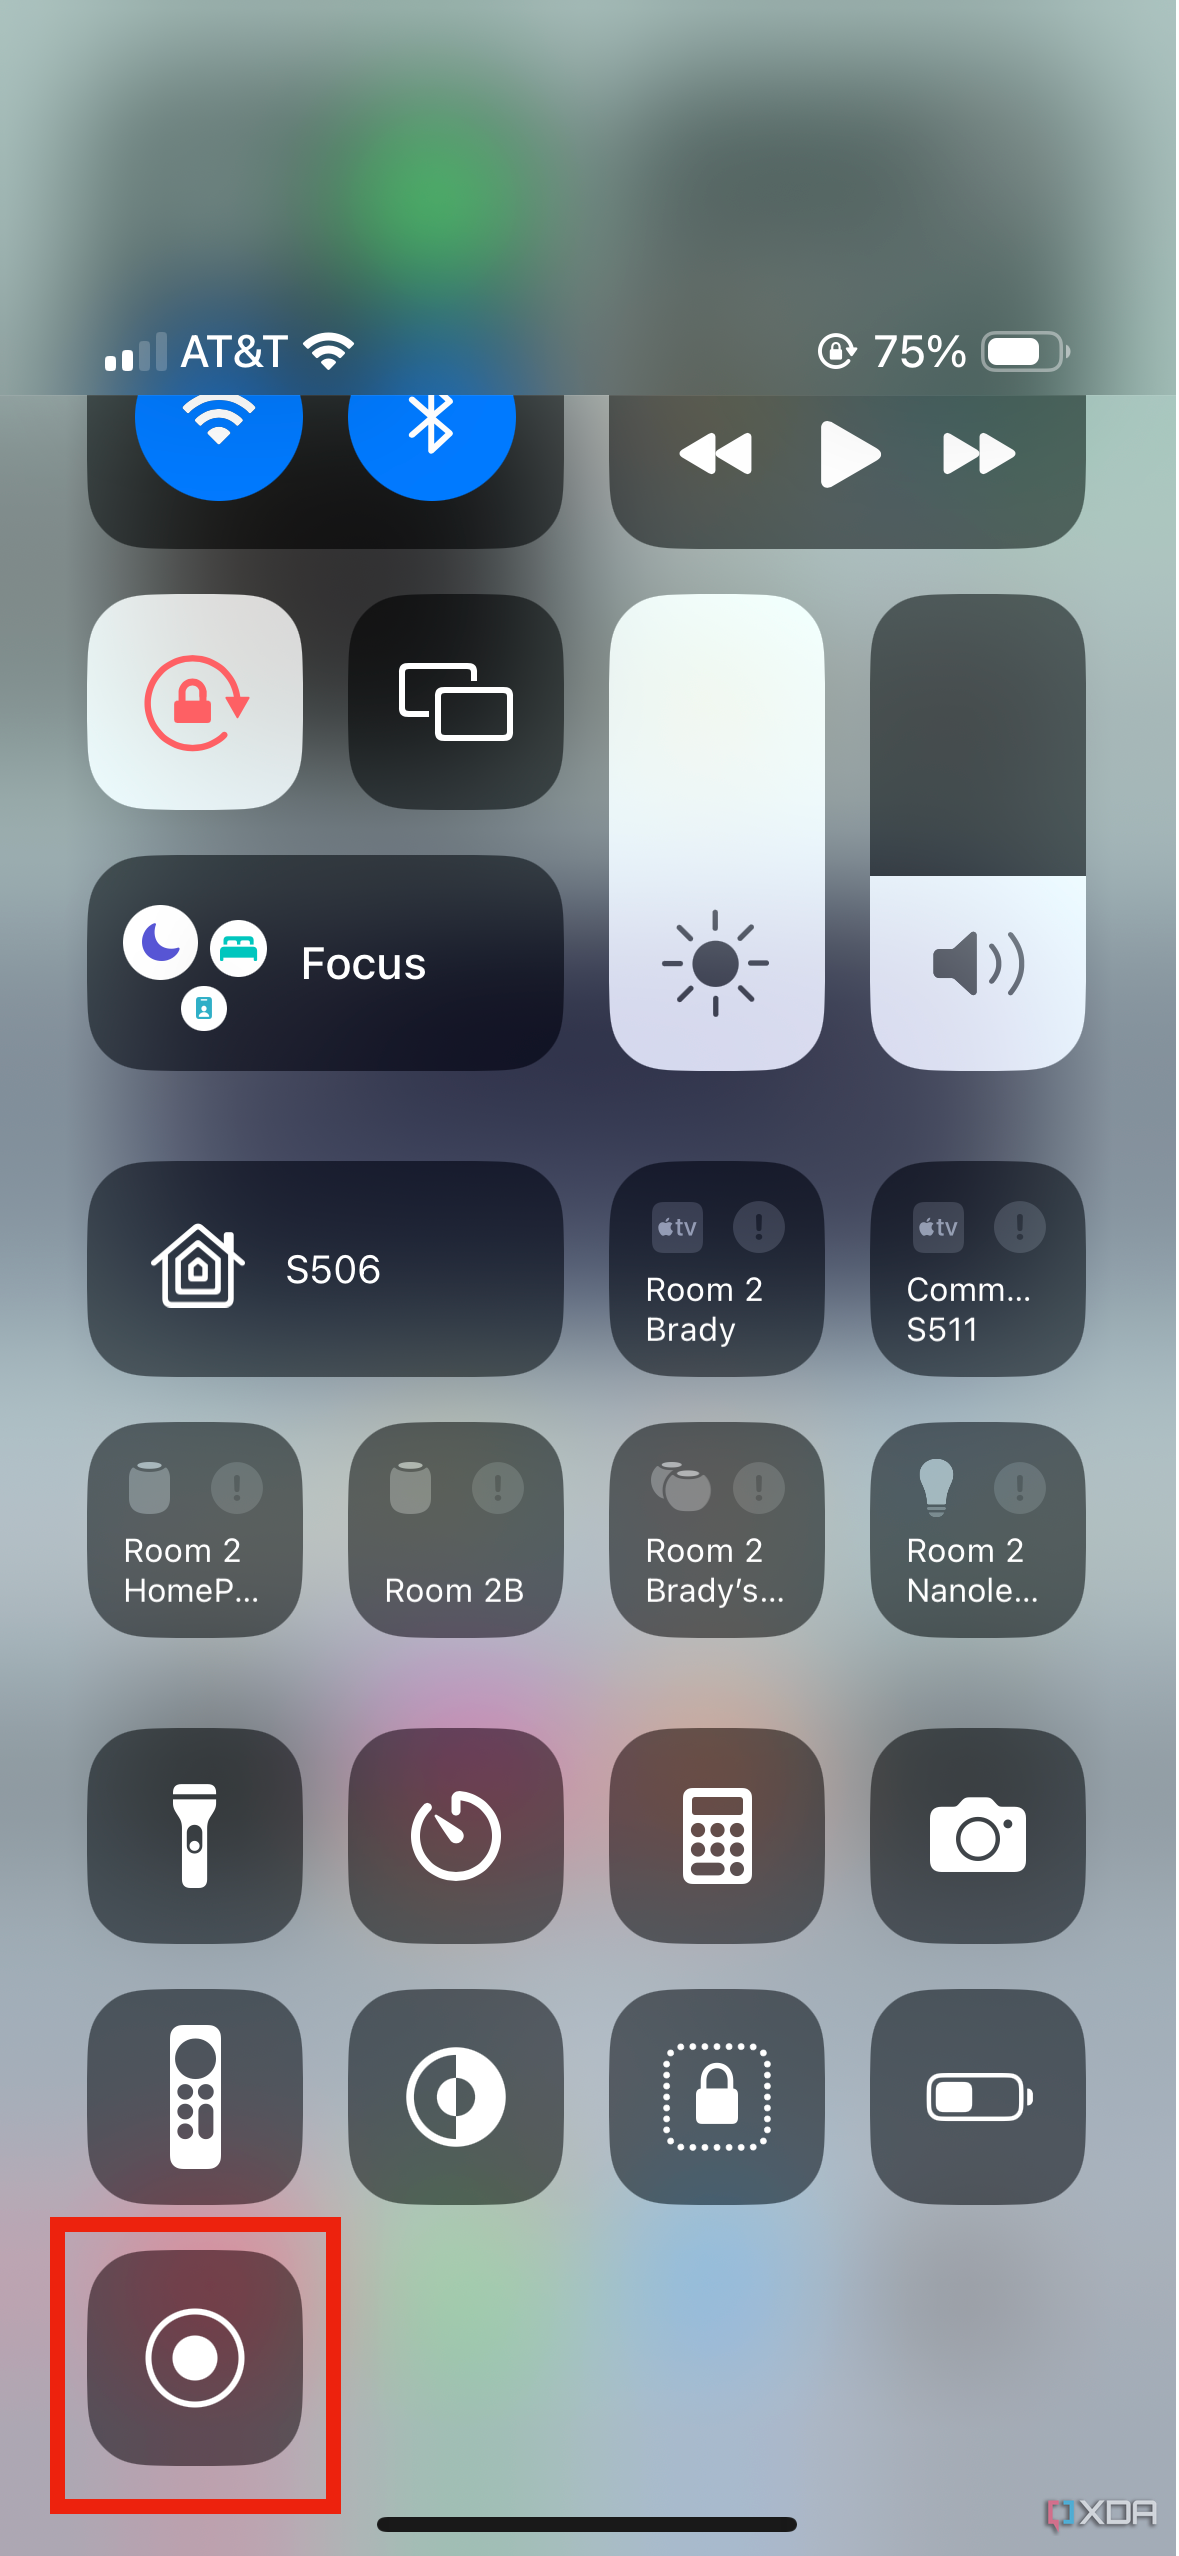 Starting a screen recording in Control Center on iOS.